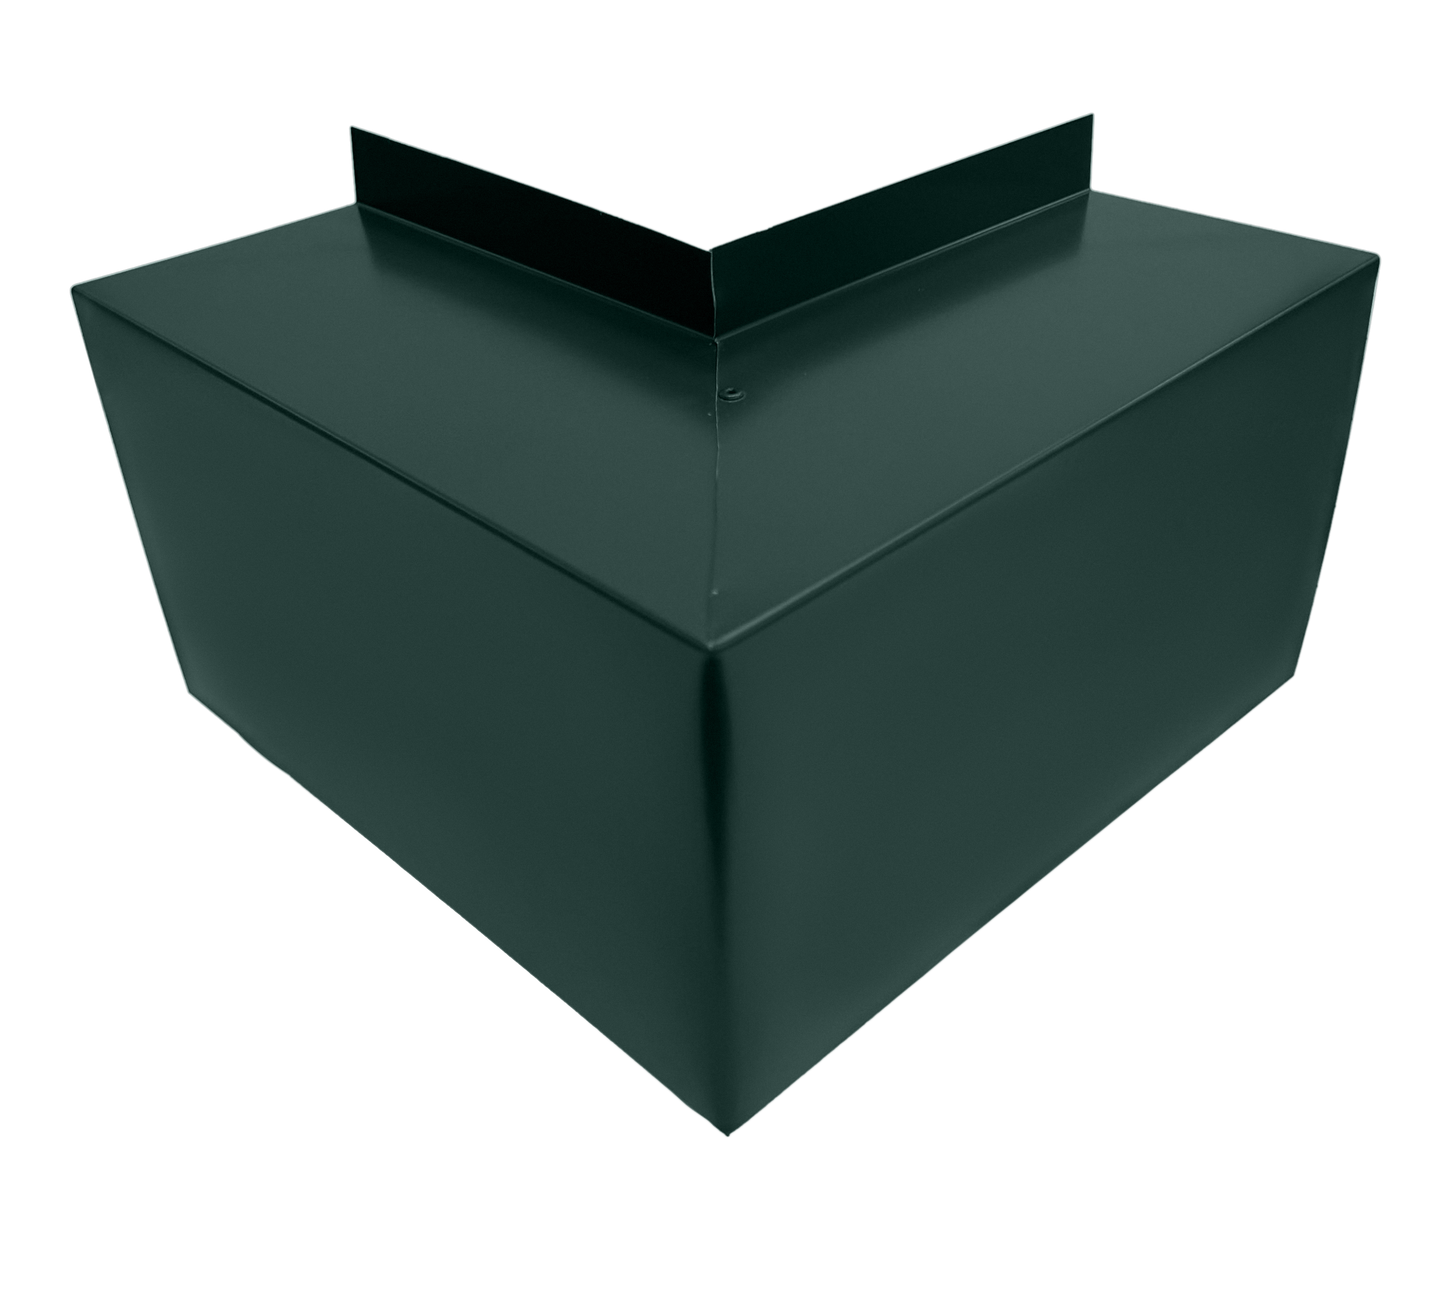 A close-up view of a dark green, angular metal structure with sharp edges and a v-shaped top. The object appears to be a decorative or functional element, possibly the Perma Cover Commercial Series - 24 Gauge Line Set Cover Outside Corner Elbows - Premium Quality, crafted from 24 gauge steel elbows for easy installation in architectural or construction settings.